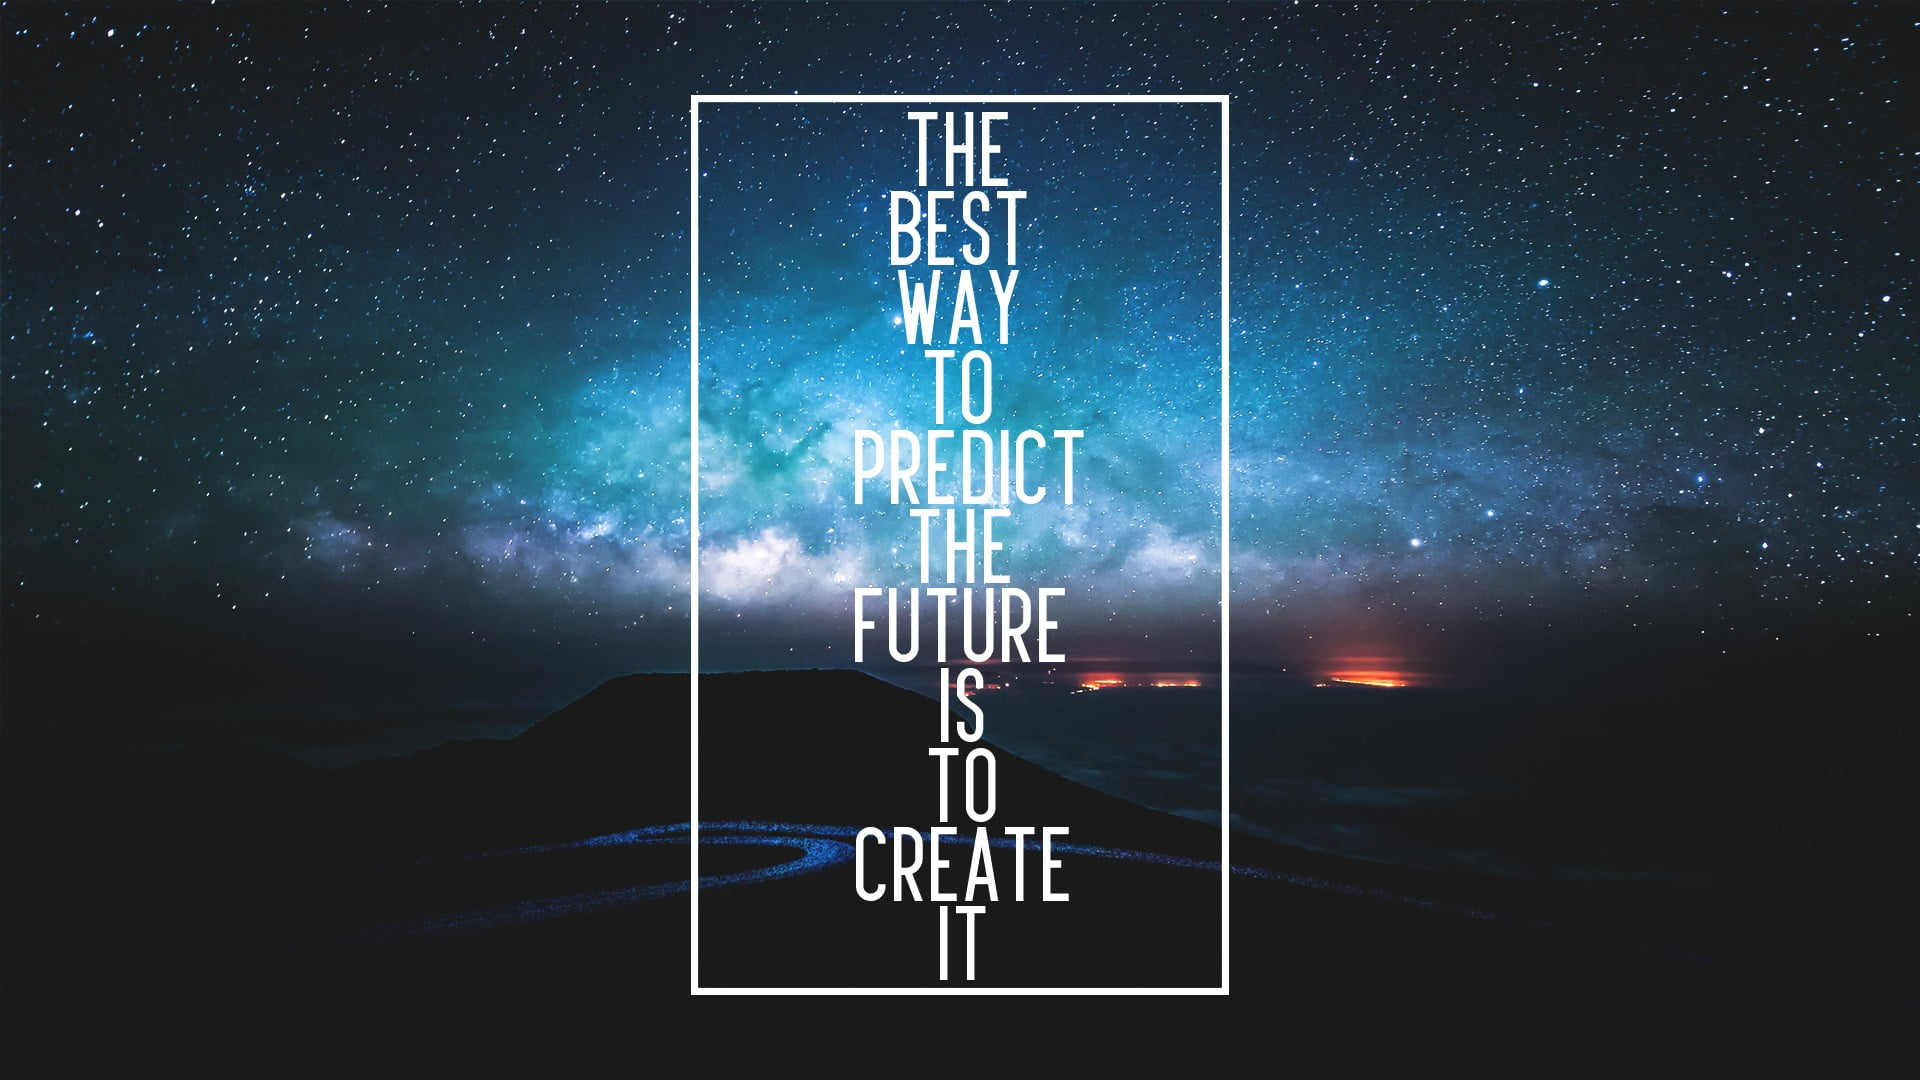 The best way to predict the future is to create it quote wallpaper, digital art